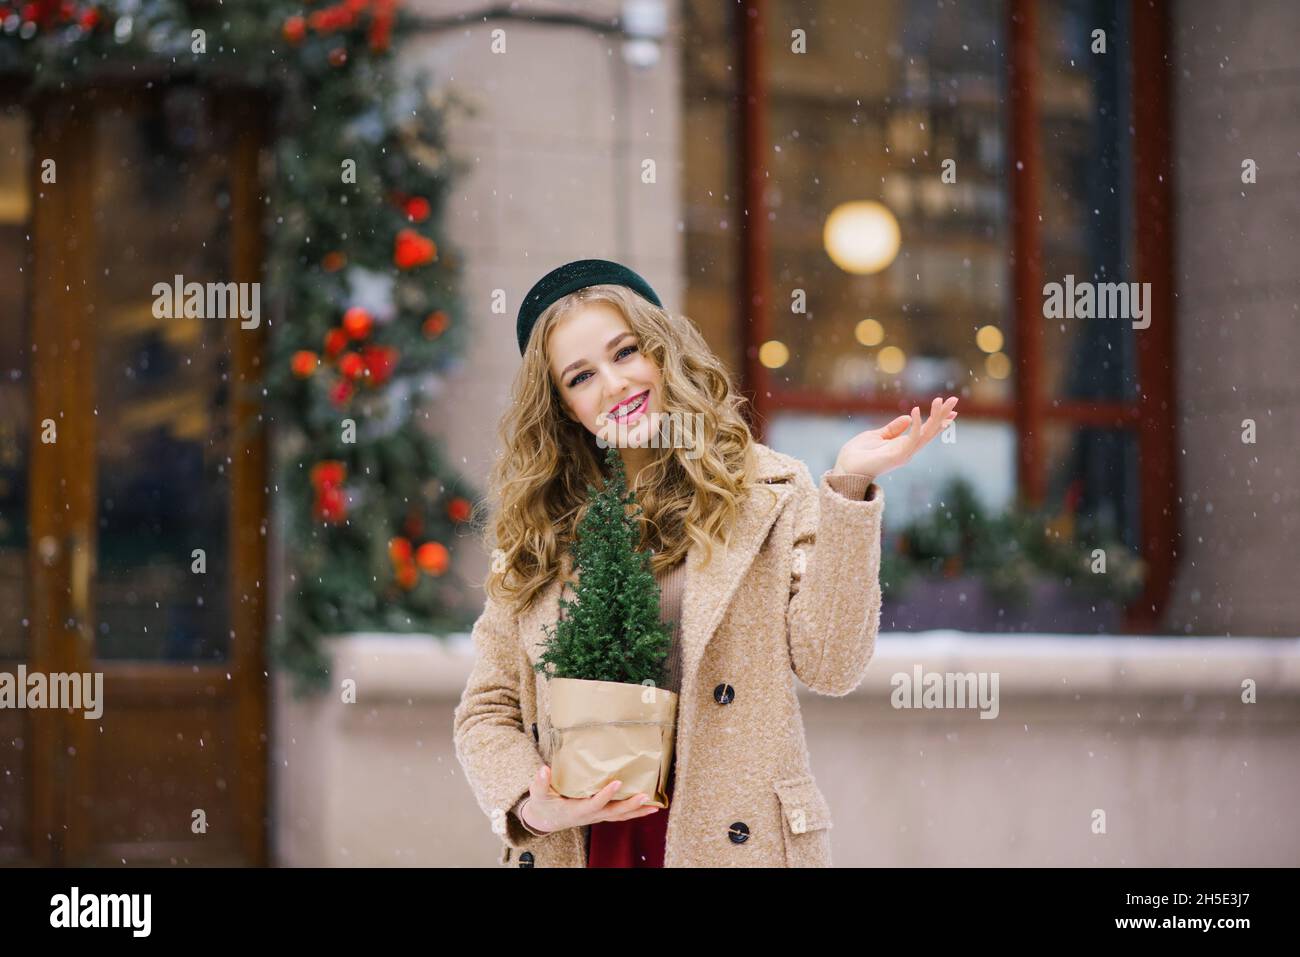 A young beautiful girl in a beige coat and a burgundy skirt is walking through a snowy city with a Christmas tree in a pot. Christmas Walk Stock Photo